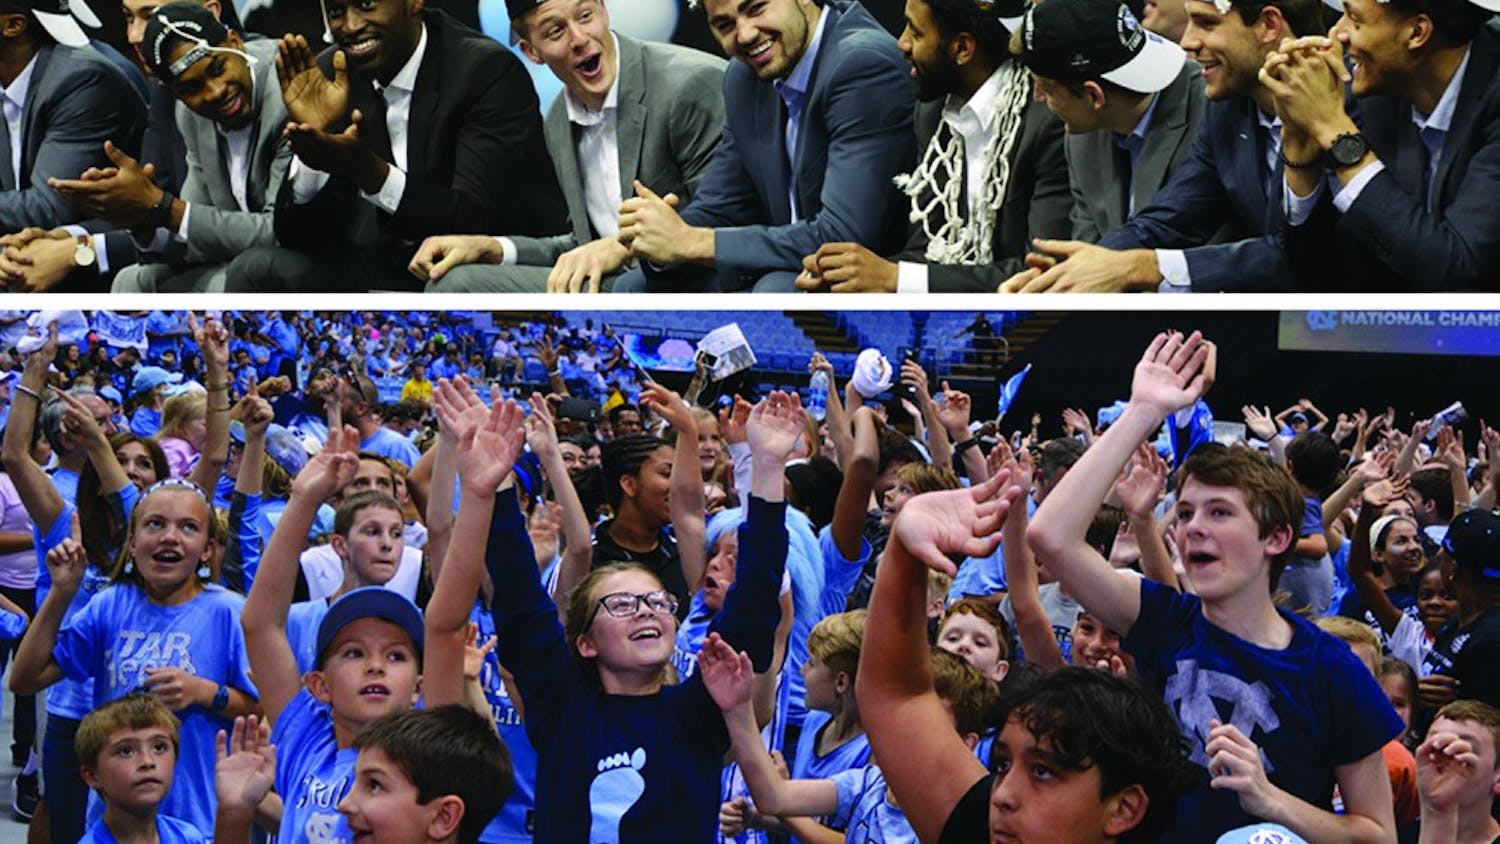 Thousands of fans welcomed the victorious UNC men’s basketball team back to Chapel Hill in the Smith Center Tuesday afternoon.